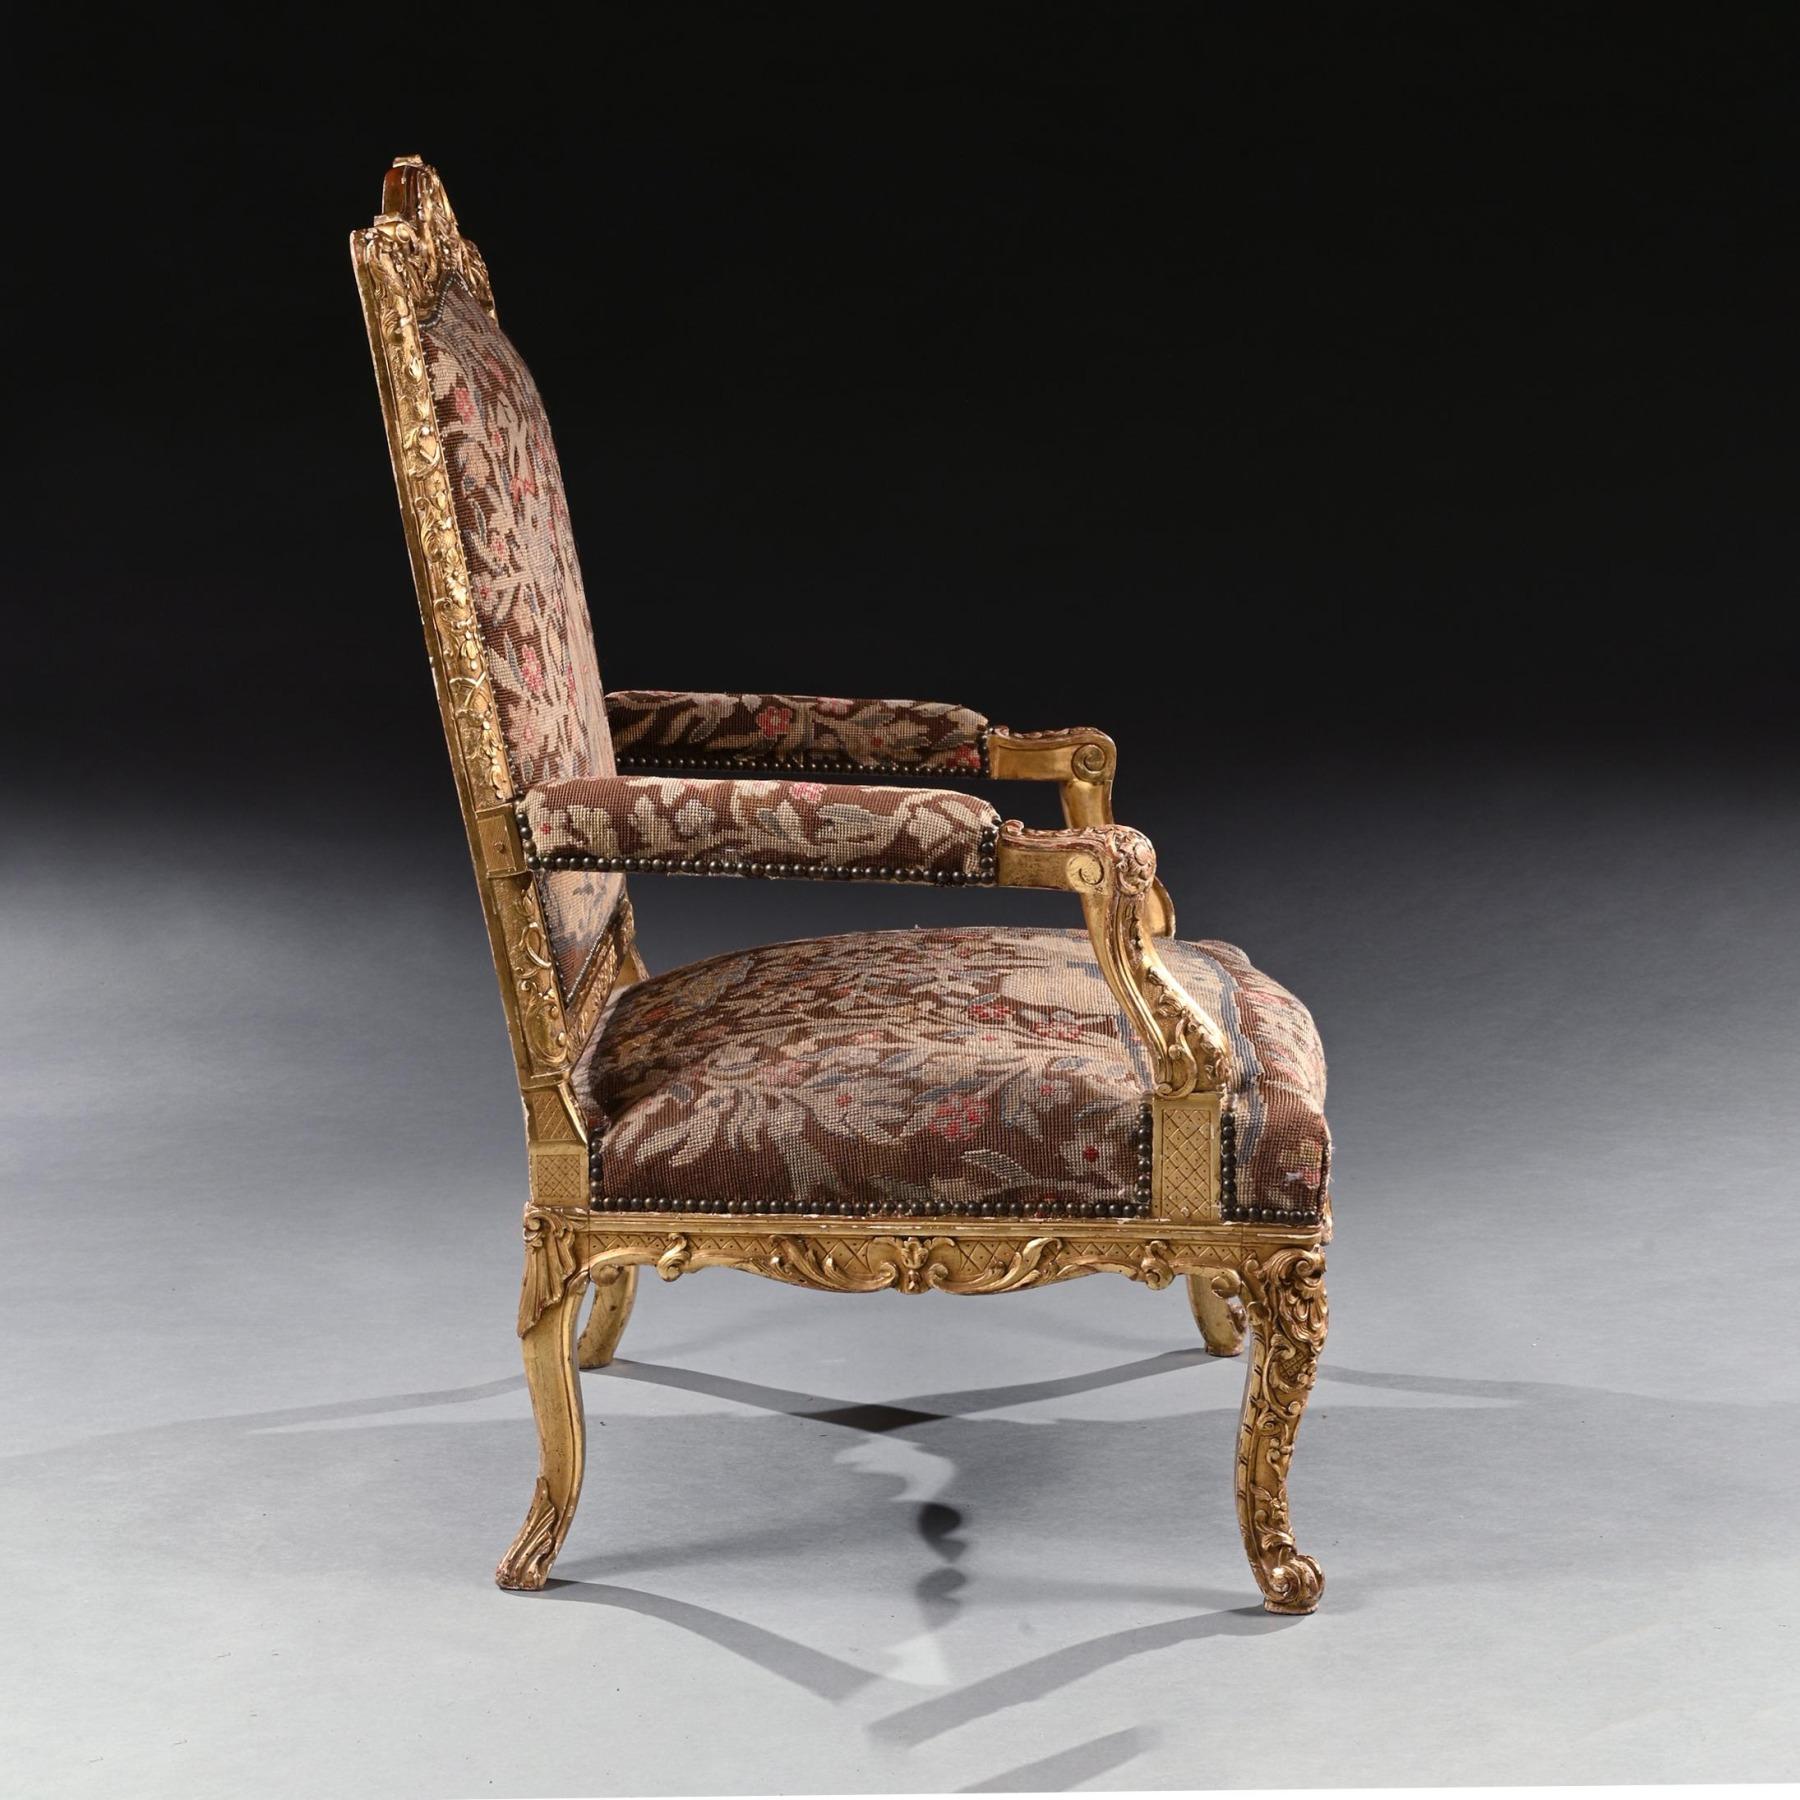 Early 18th Century Fine 18th Century French Regence Period Giltwood Armchair Fauteuil For Sale